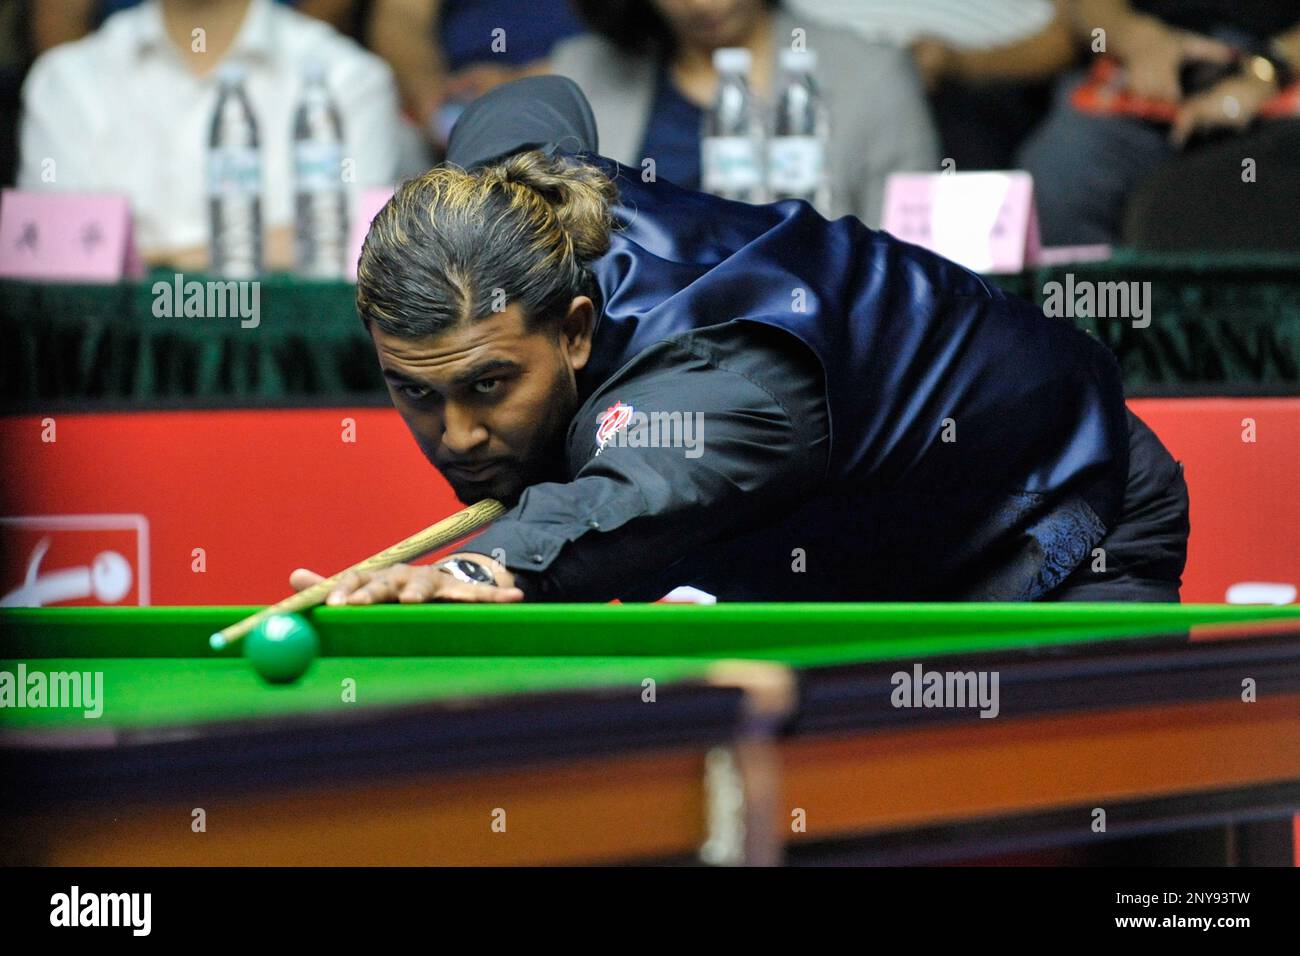 Hammad Miah of England plays a shot to Ding Junhui of China in their Qualifying match of the 2017 World Open snooker tournament in Yushan county, Shangrao city, east Chinas Jiangxi province,